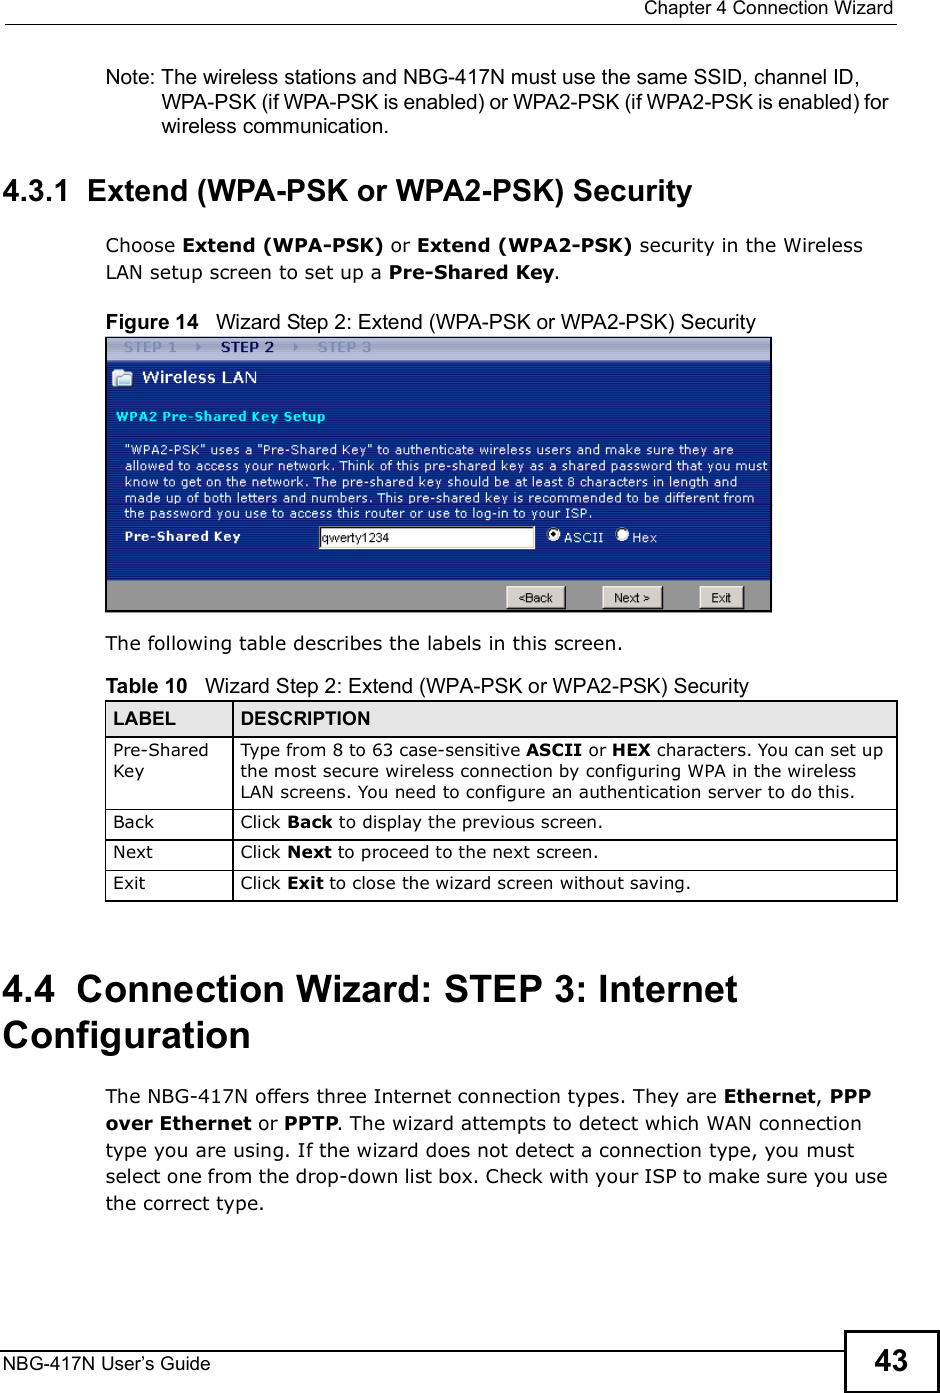  Chapter 4Connection WizardNBG-417N User s Guide 43Note: The wireless stations and NBG-417N must use the same SSID, channel ID, WPA-PSK (if WPA-PSK is enabled) or WPA2-PSK (if WPA2-PSK is enabled) for wireless communication.4.3.1  Extend (WPA-PSK or WPA2-PSK) SecurityChoose Extend (WPA-PSK) or Extend (WPA2-PSK) security in the Wireless LAN setup screen to set up a Pre-Shared Key.Figure 14   Wizard Step 2: Extend (WPA-PSK or WPA2-PSK) SecurityThe following table describes the labels in this screen. 4.4  Connection Wizard: STEP 3: Internet ConfigurationThe NBG-417N offers three Internet connection types. They are Ethernet, PPP over Ethernet or PPTP. The wizard attempts to detect which WAN connection type you are using. If the wizard does not detect a connection type, you must select one from the drop-down list box. Check with your ISP to make sure you use the correct type.Table 10   Wizard Step 2: Extend (WPA-PSK or WPA2-PSK) SecurityLABEL DESCRIPTIONPre-Shared KeyType from 8 to 63 case-sensitive ASCII or HEX characters. You can set up the most secure wireless connection by configuring WPA in the wireless LAN screens. You need to configure an authentication server to do this.Back Click Back to display the previous screen.Next Click Next to proceed to the next screen. Exit Click Exit to close the wizard screen without saving.